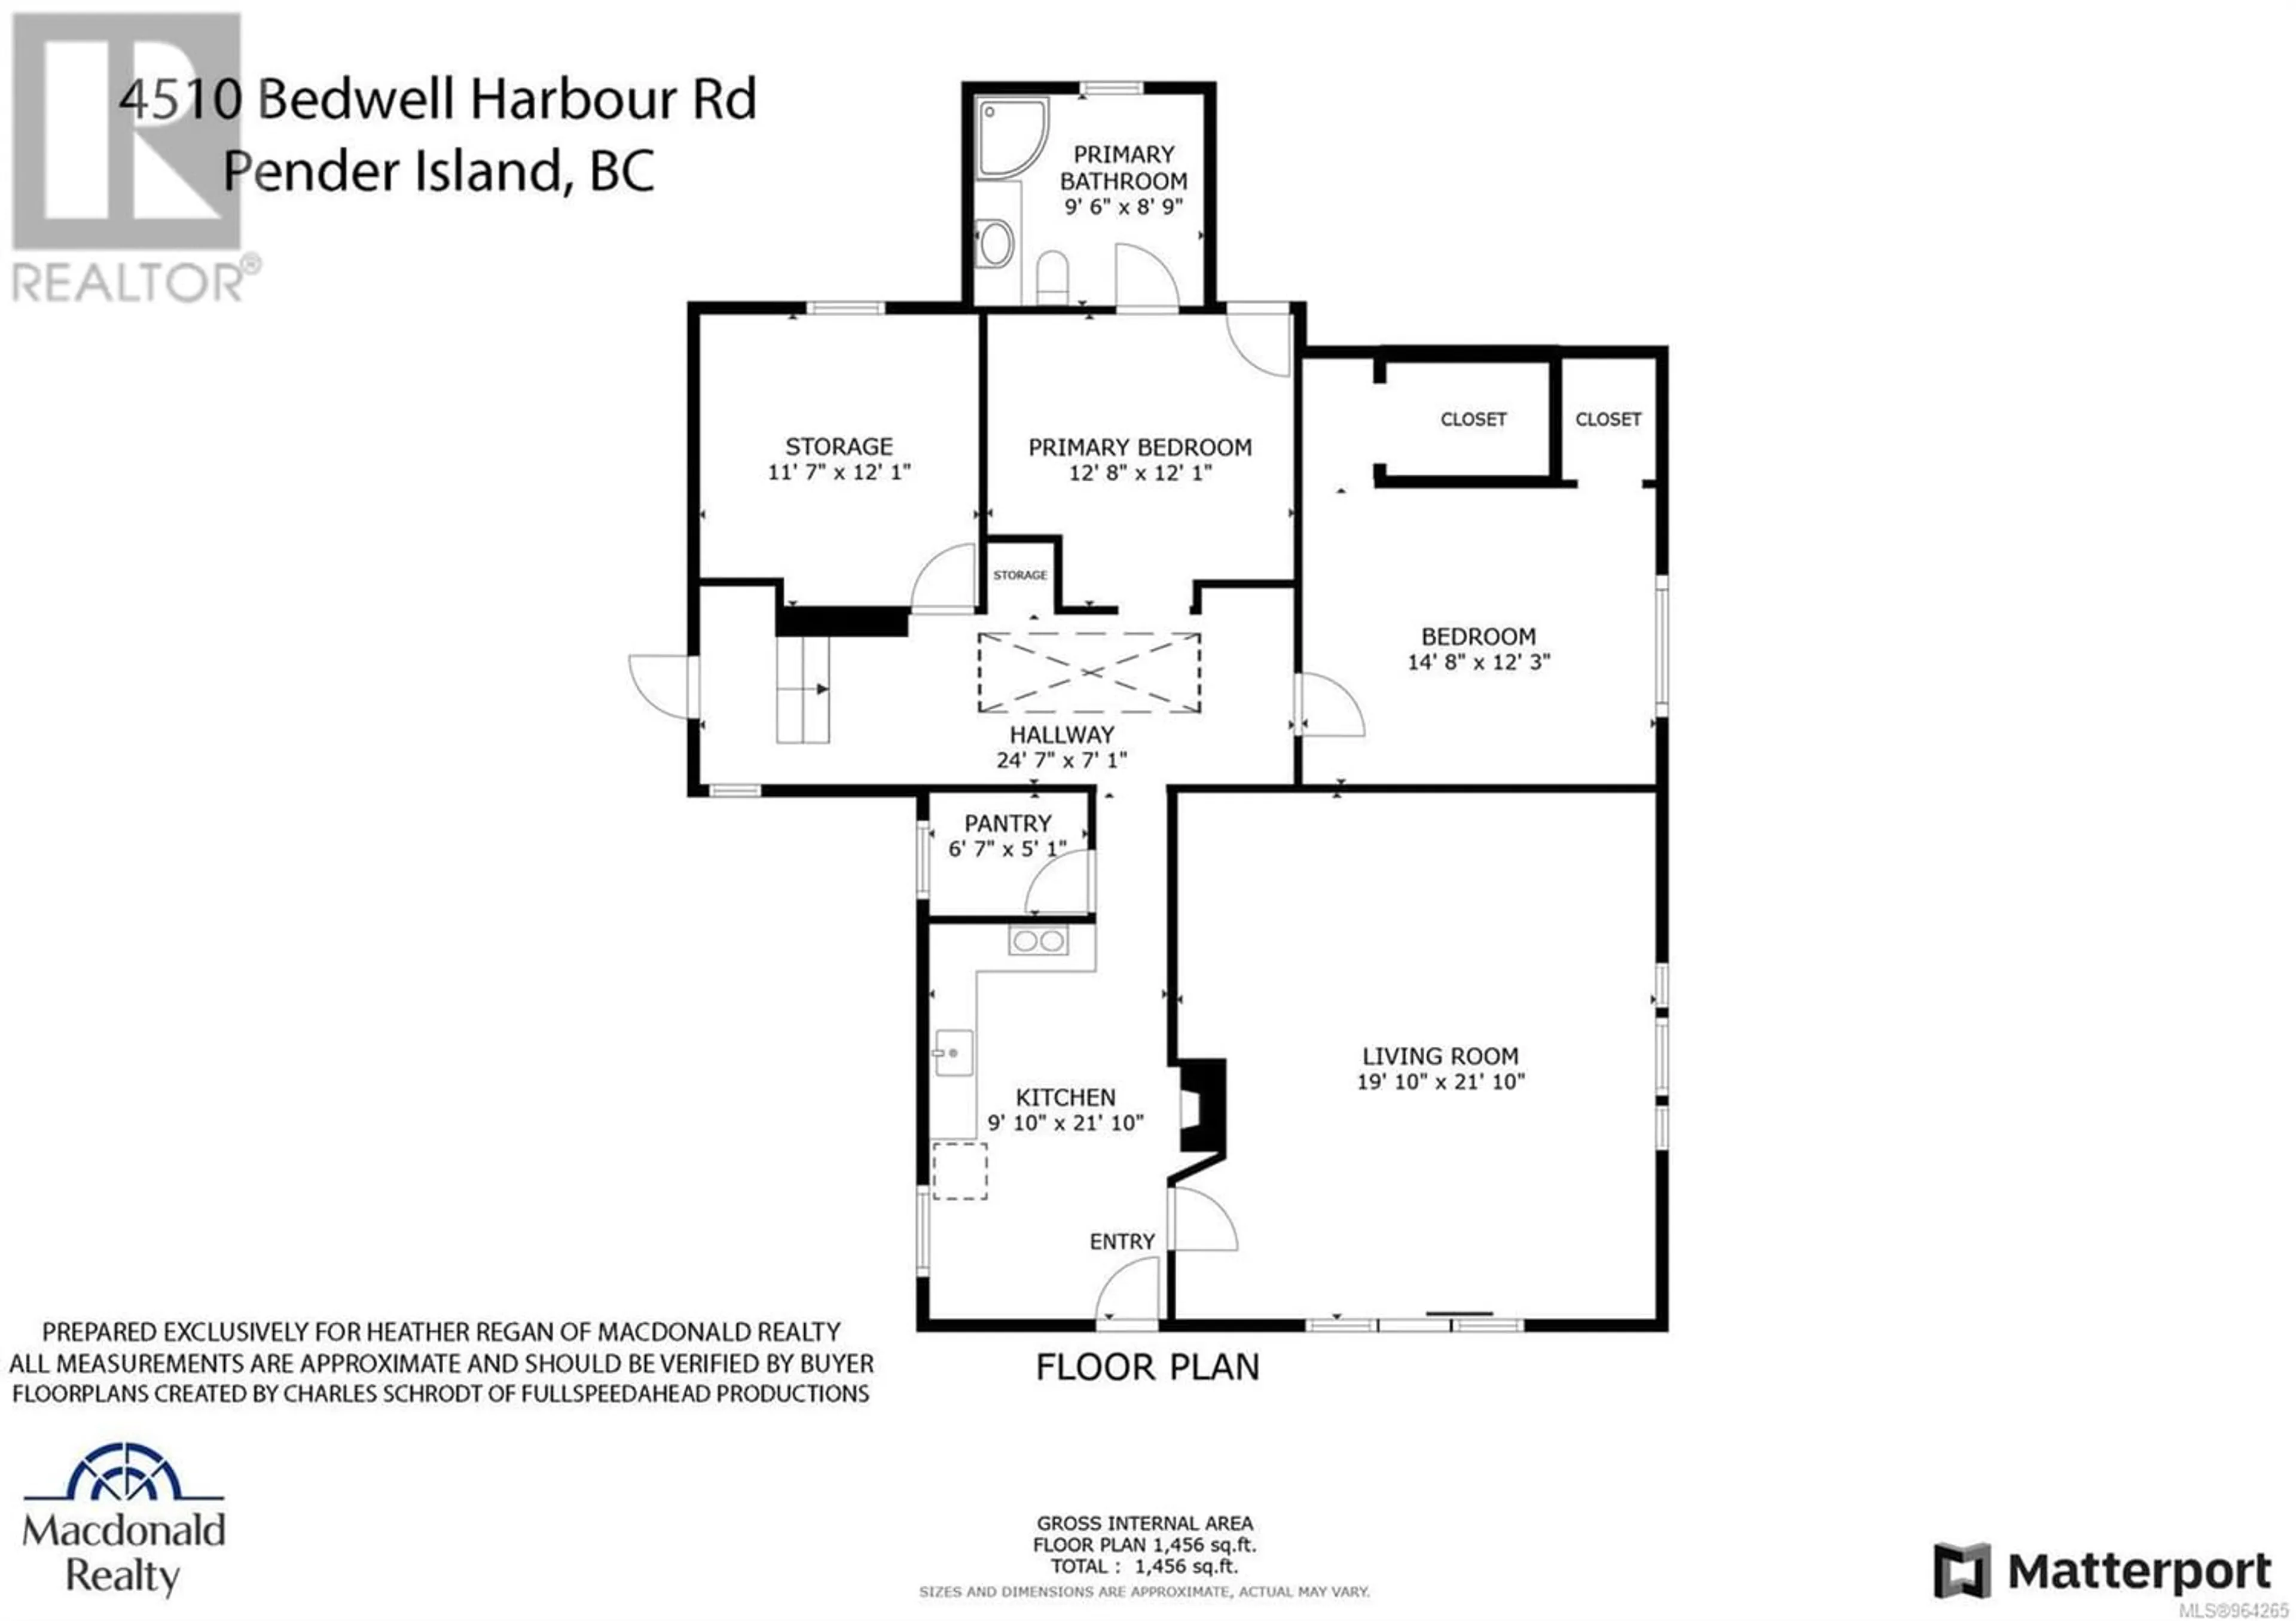 Floor plan for 4510 Bedwell Harbour Rd, Pender Island British Columbia V0N2M1